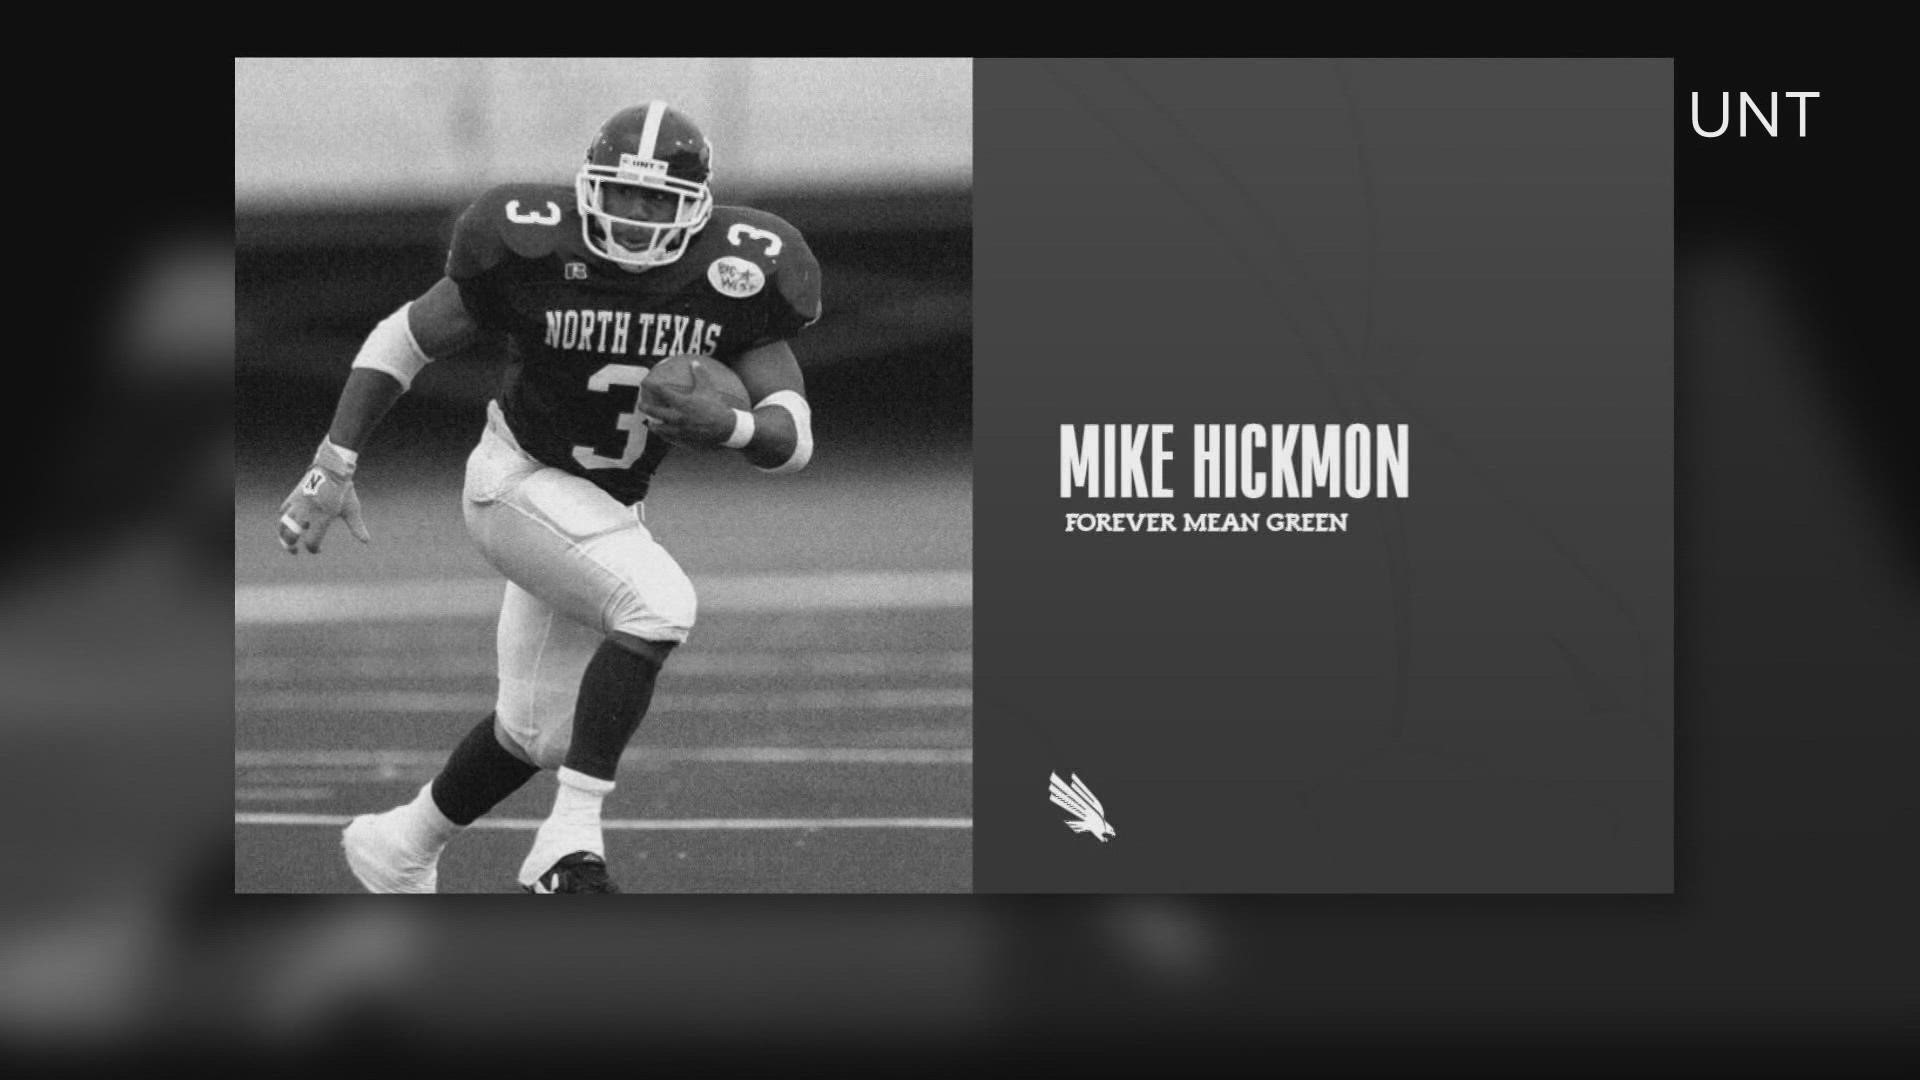 Tributes surrounding youth football coach and former UNT running back Mike Hickmon have been mounting after he was fatally shot in Lancaster, Texas, while coaching.